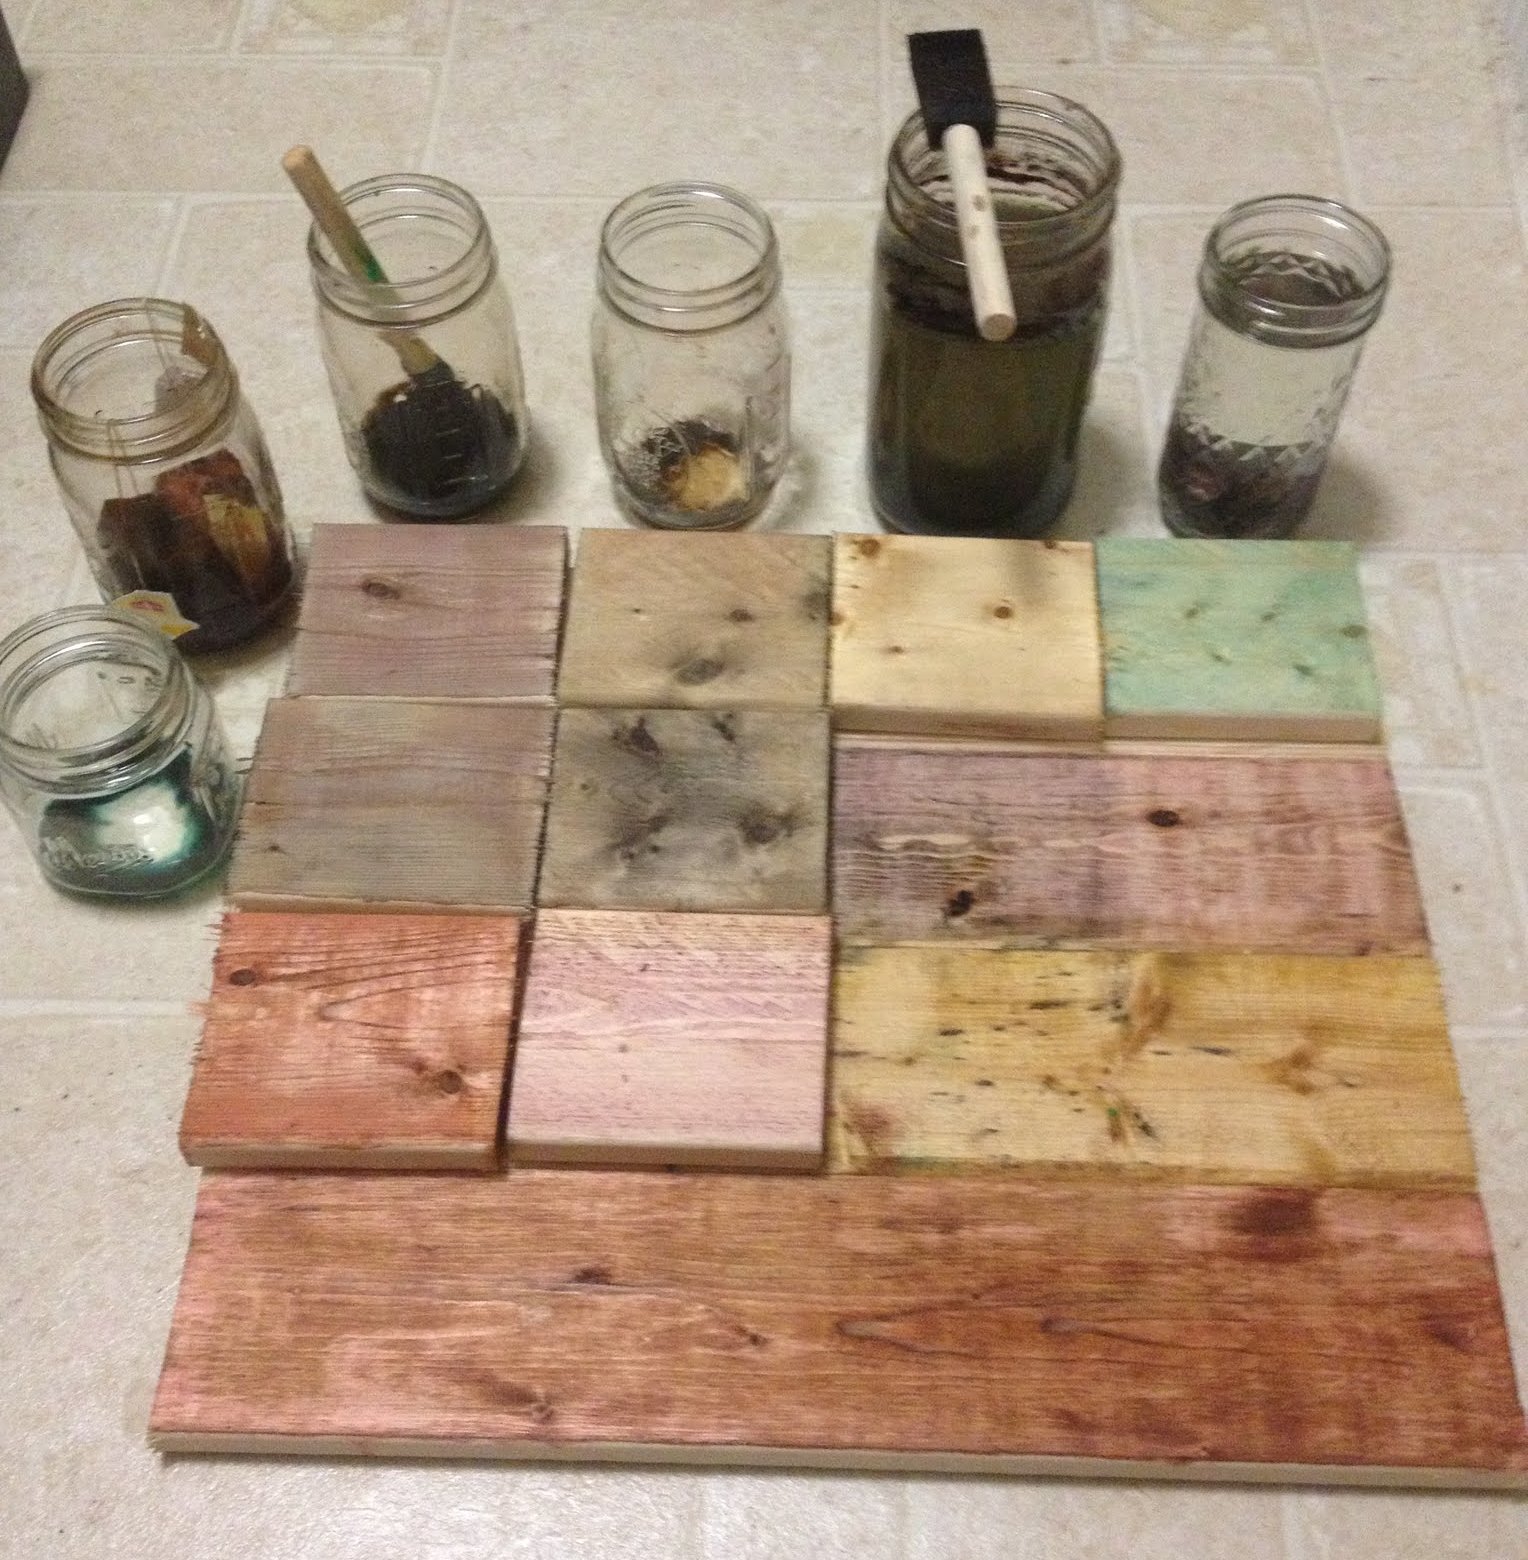 How do you stain wood?